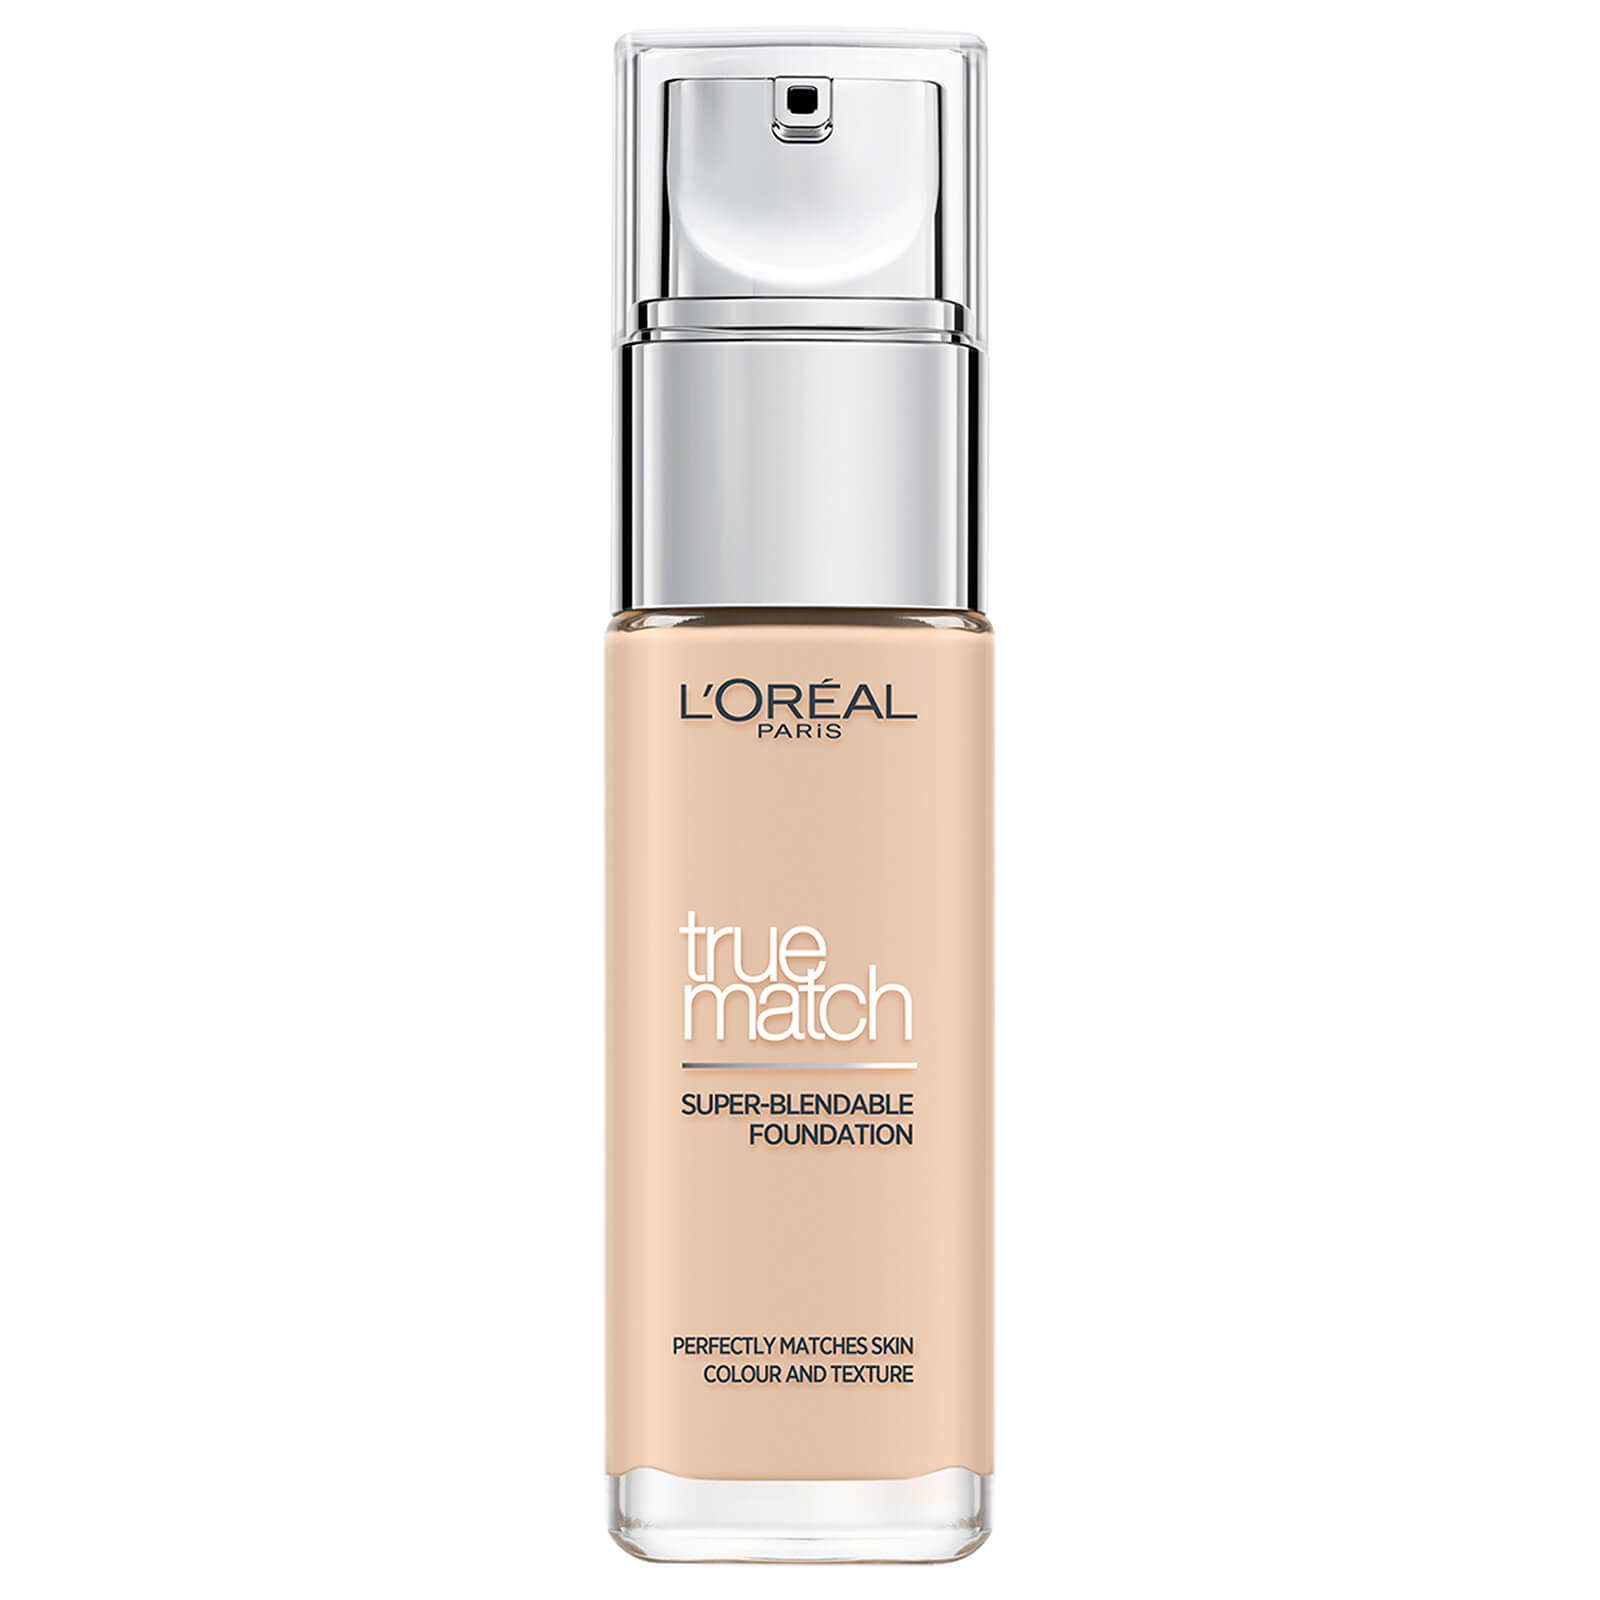 L'Oréal Paris True Match Liquid Foundation with SPF and Hyaluronic Acid 30ml (Various Shades) - 0.5N Porcelain